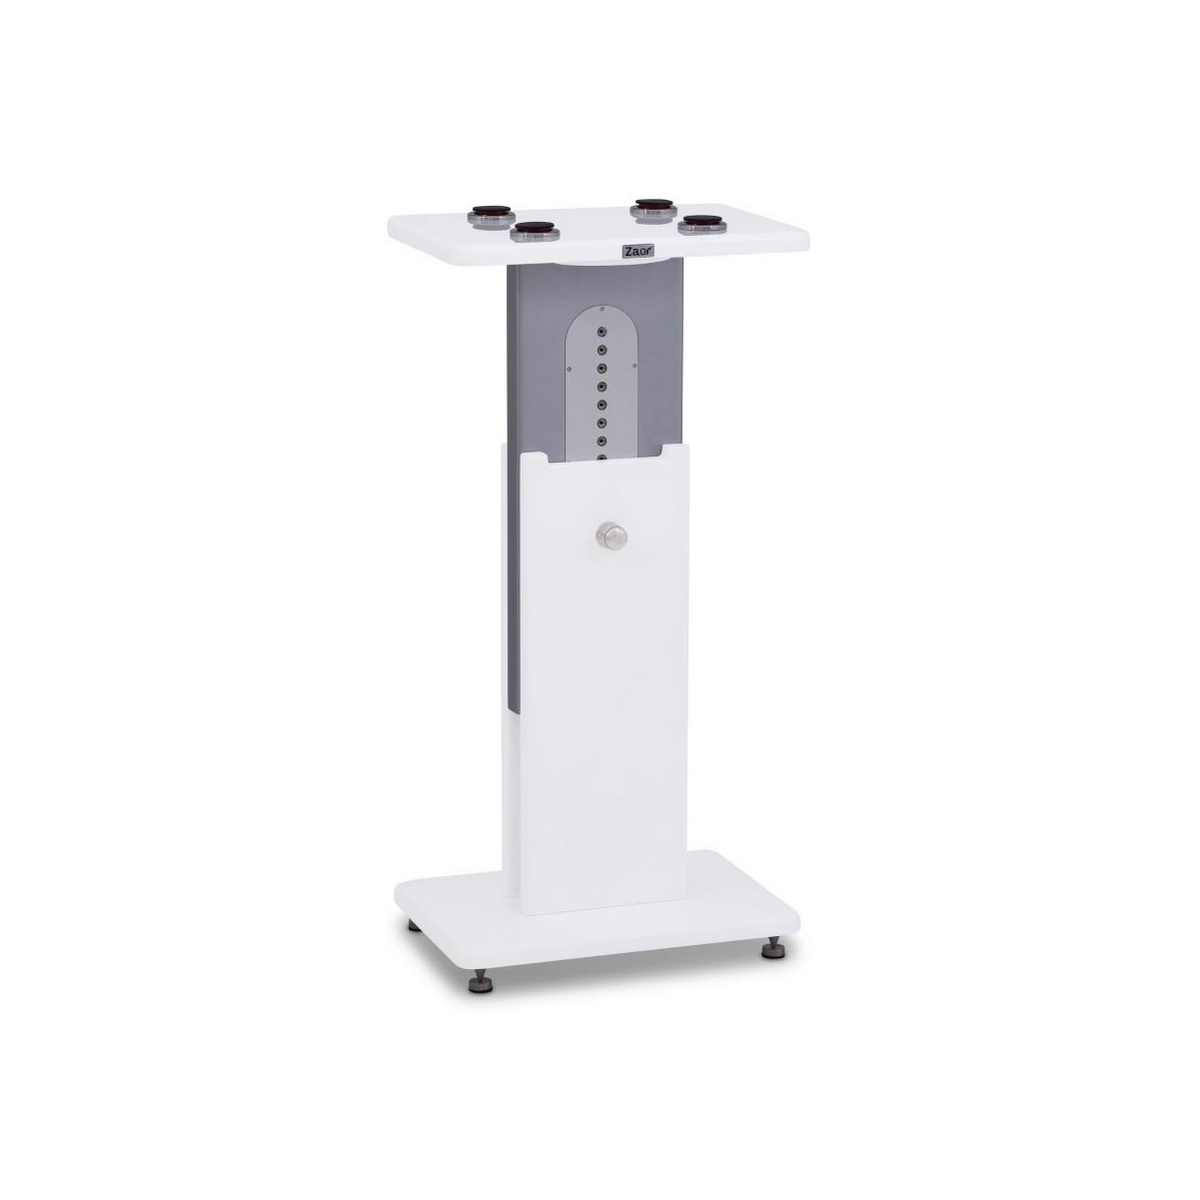 Pieds enceintes monitoring - Zaor - ISO STAND MKIII 600 (BLANC)